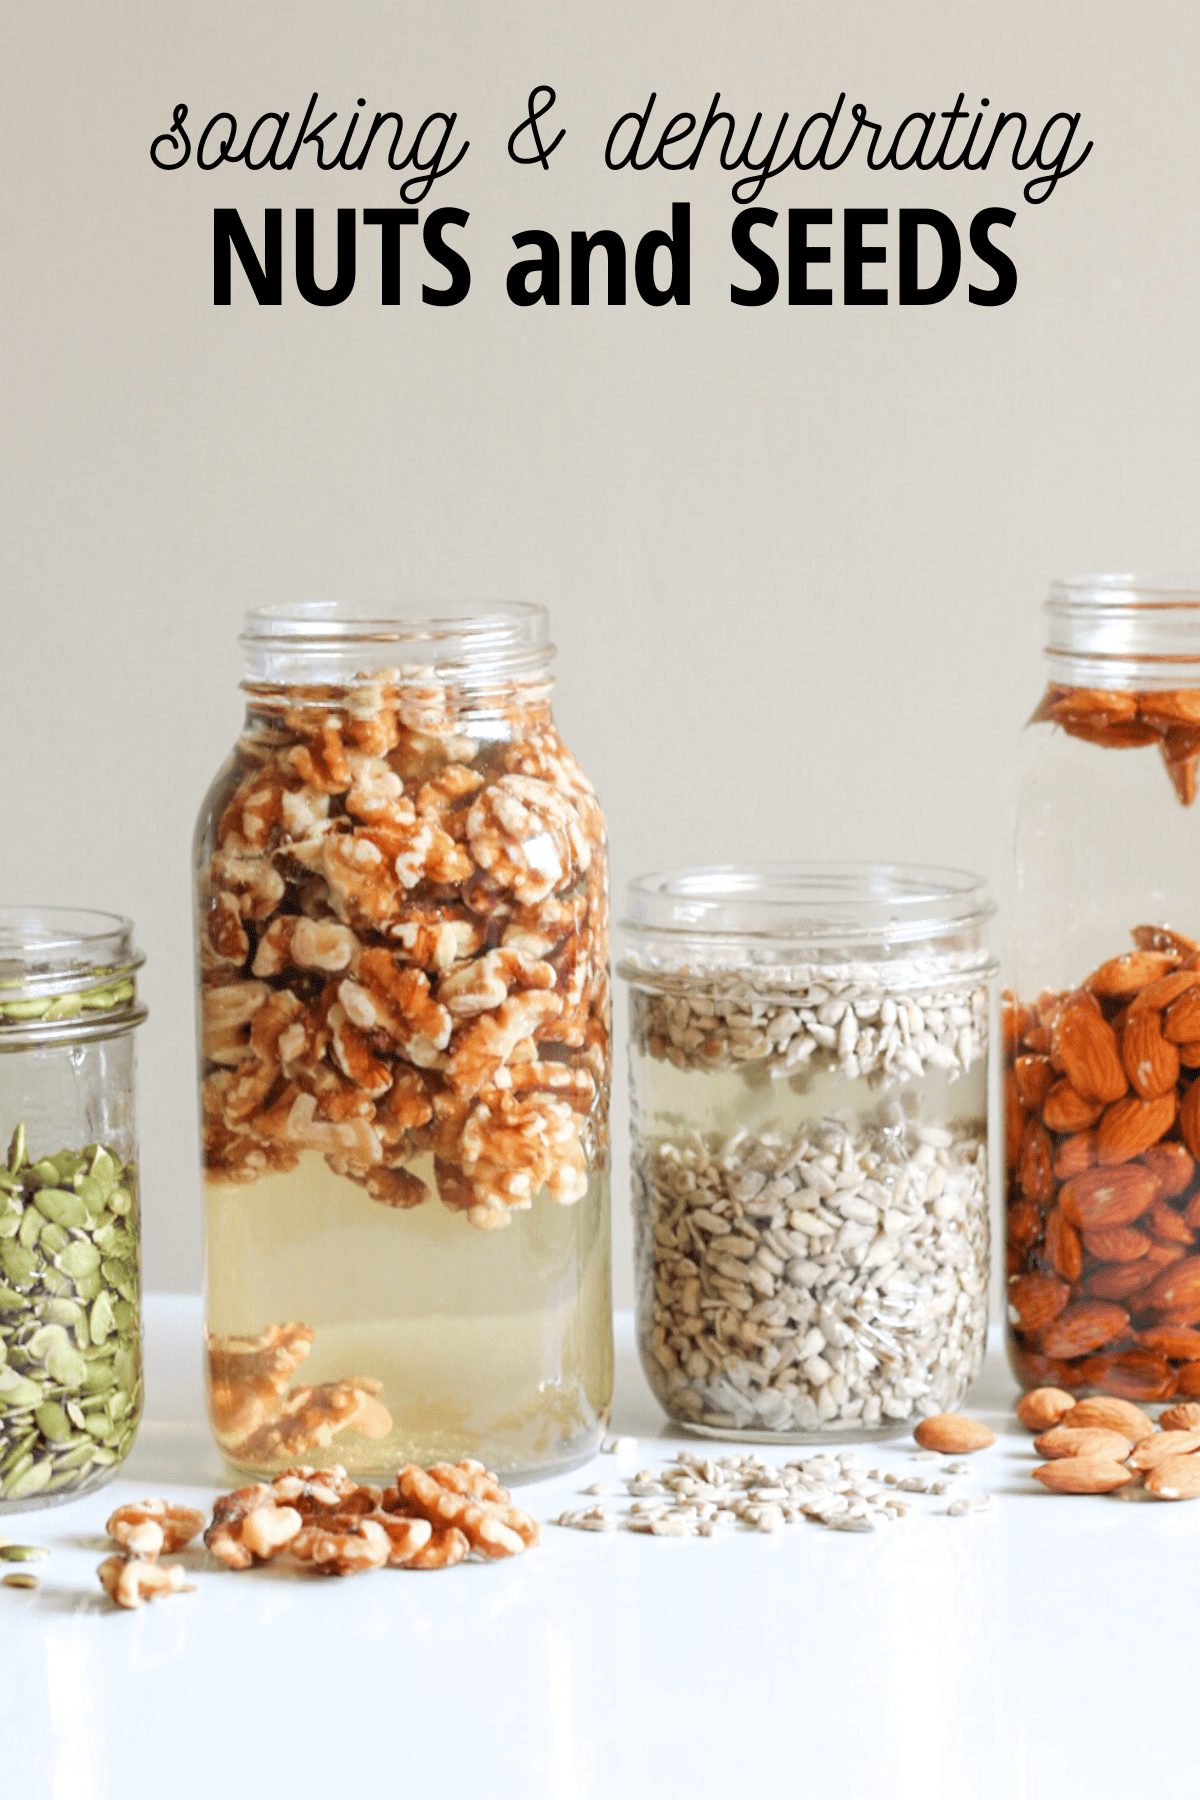 jars of nuts and seeds soaking in water